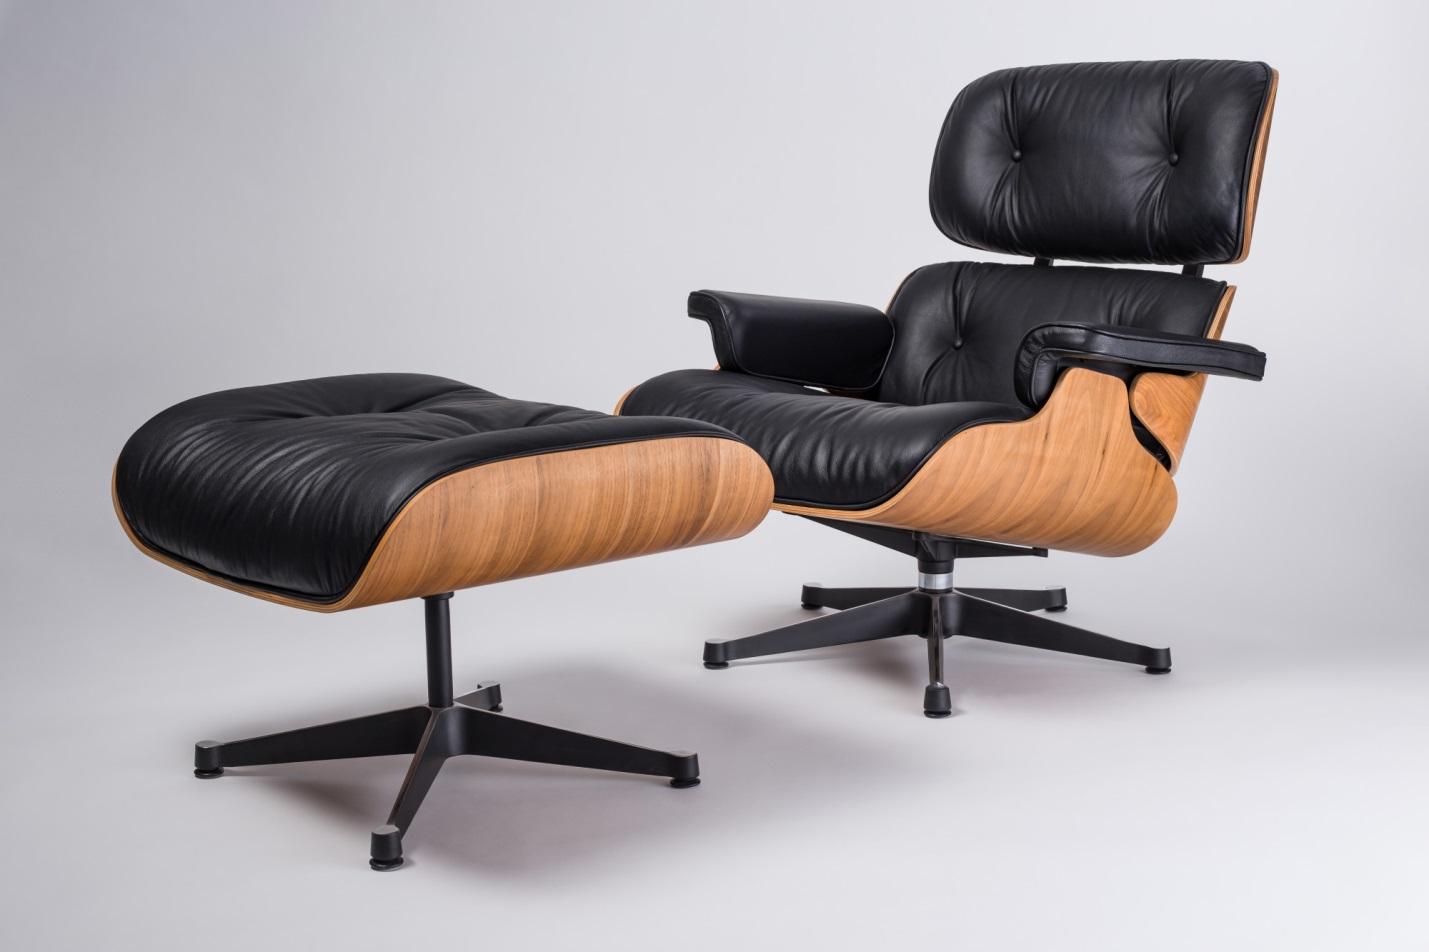 Eames-style lounge chair and ottoman.